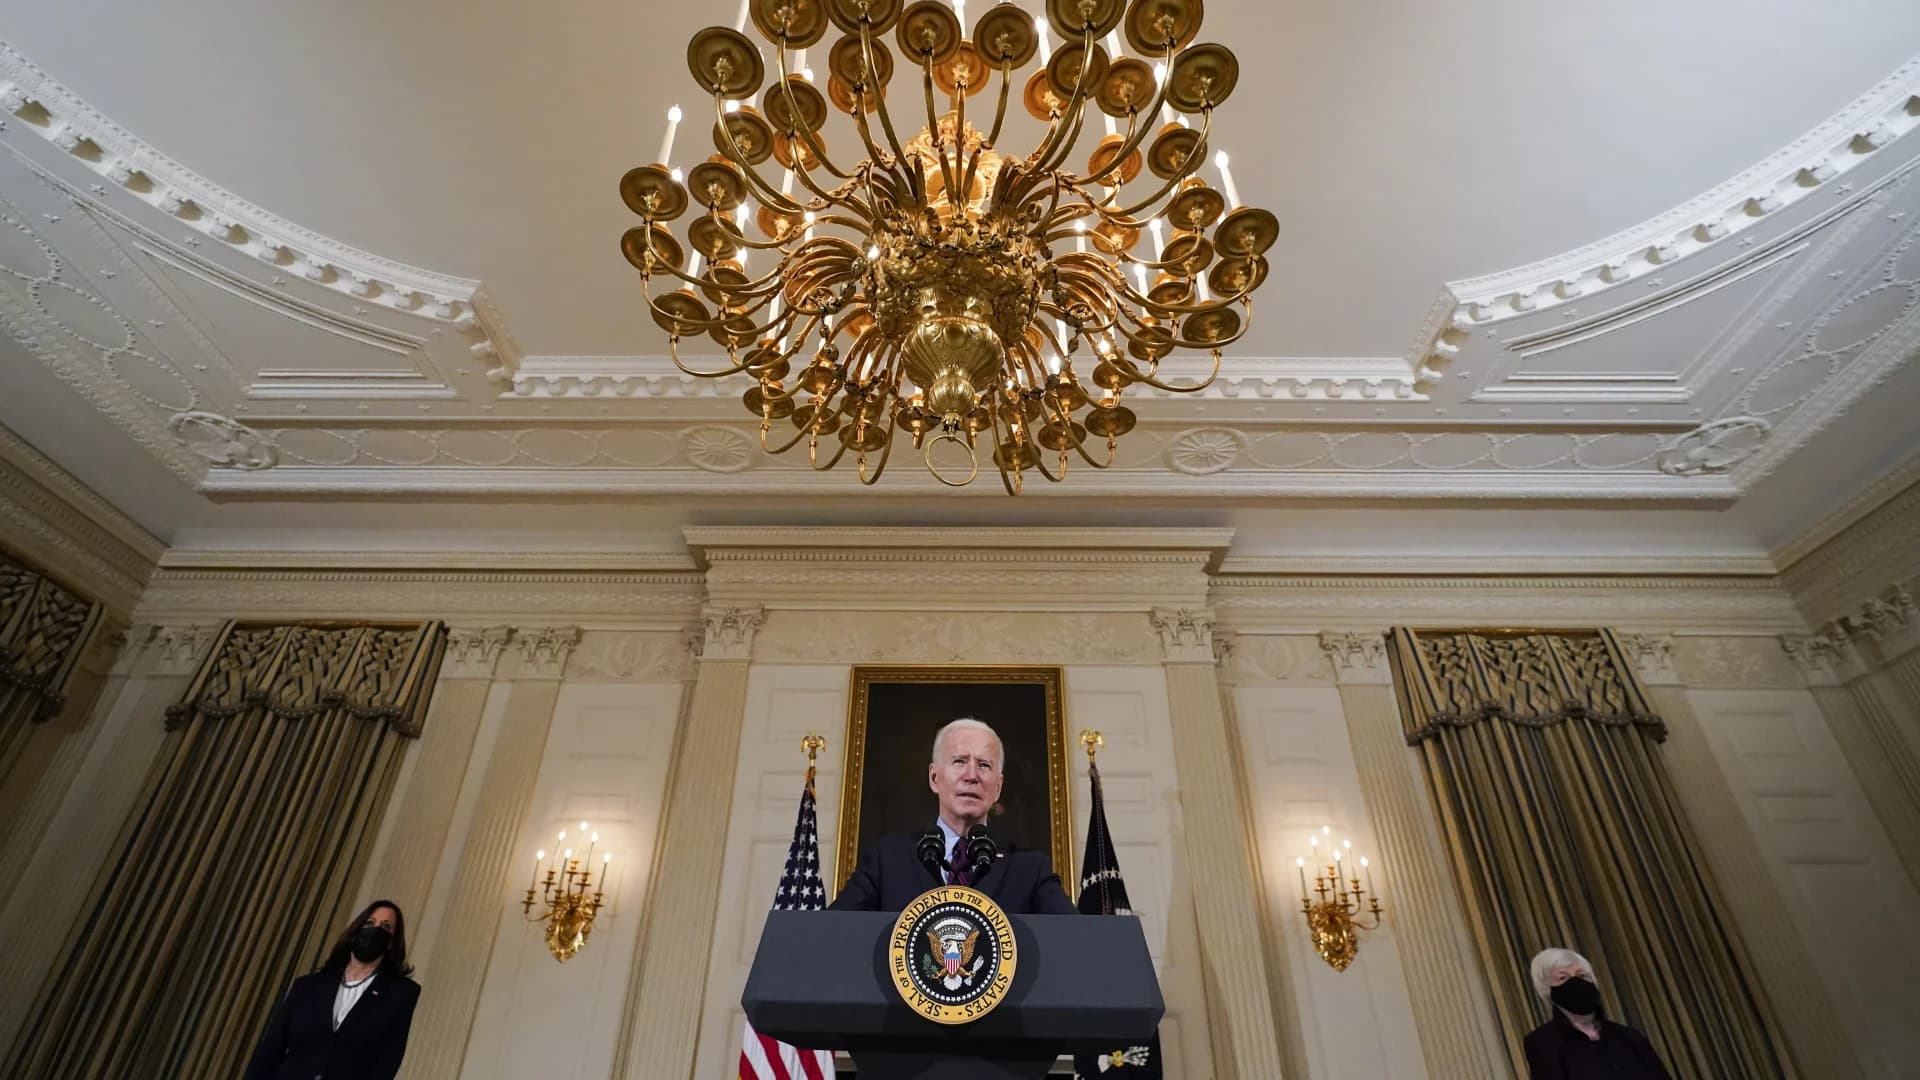 President Biden wants fast COVID aid, but minimum wage hike in doubt